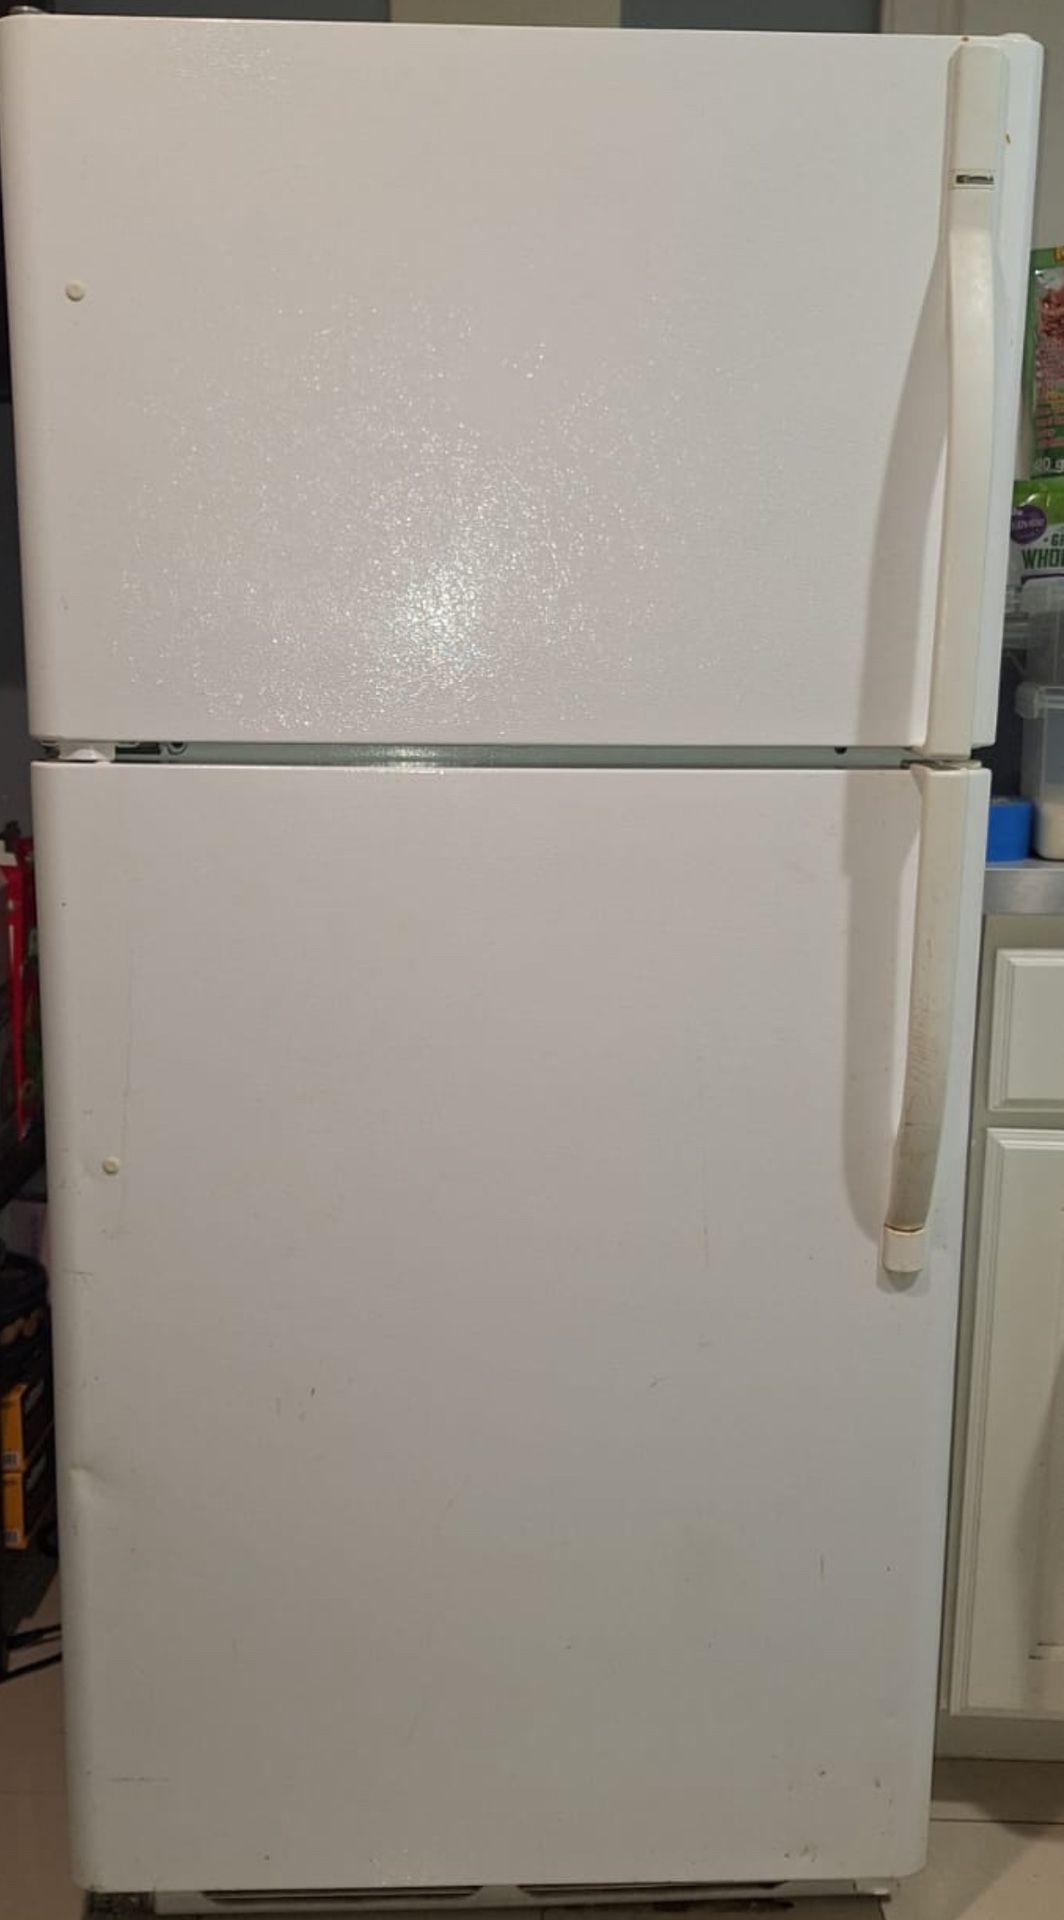 Refrigerator For Only $75. 